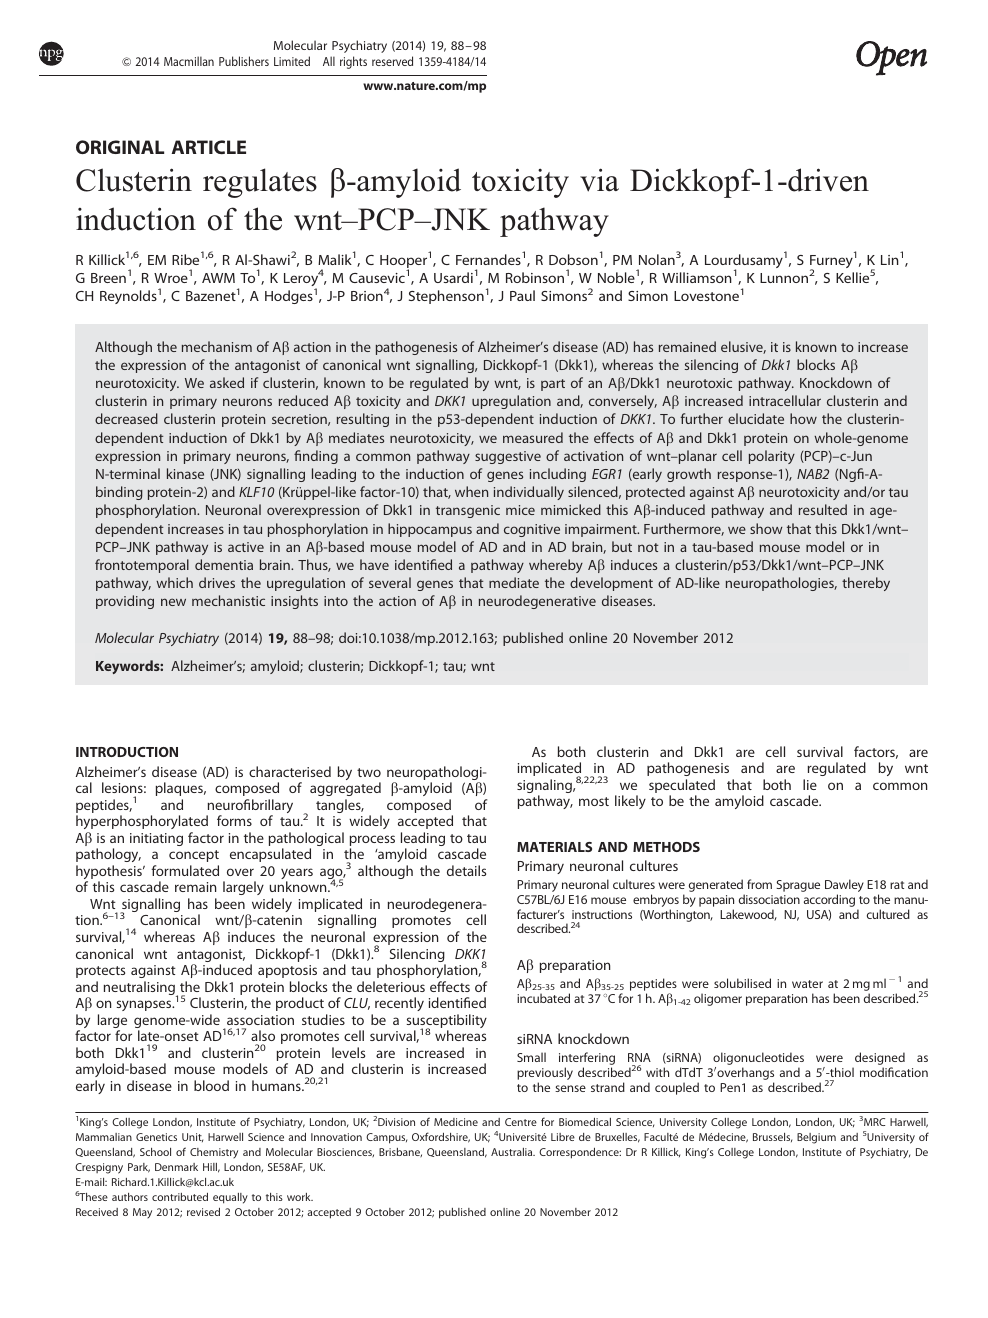 Clusterin Regulates B Amyloid Toxicity Via Dickkopf 1 Driven Induction Of The Wnt Pcp Jnk Pathway Topic Of Research Paper In Biological Sciences Download Scholarly Article Pdf And Read For Free On Cyberleninka Open Science Hub